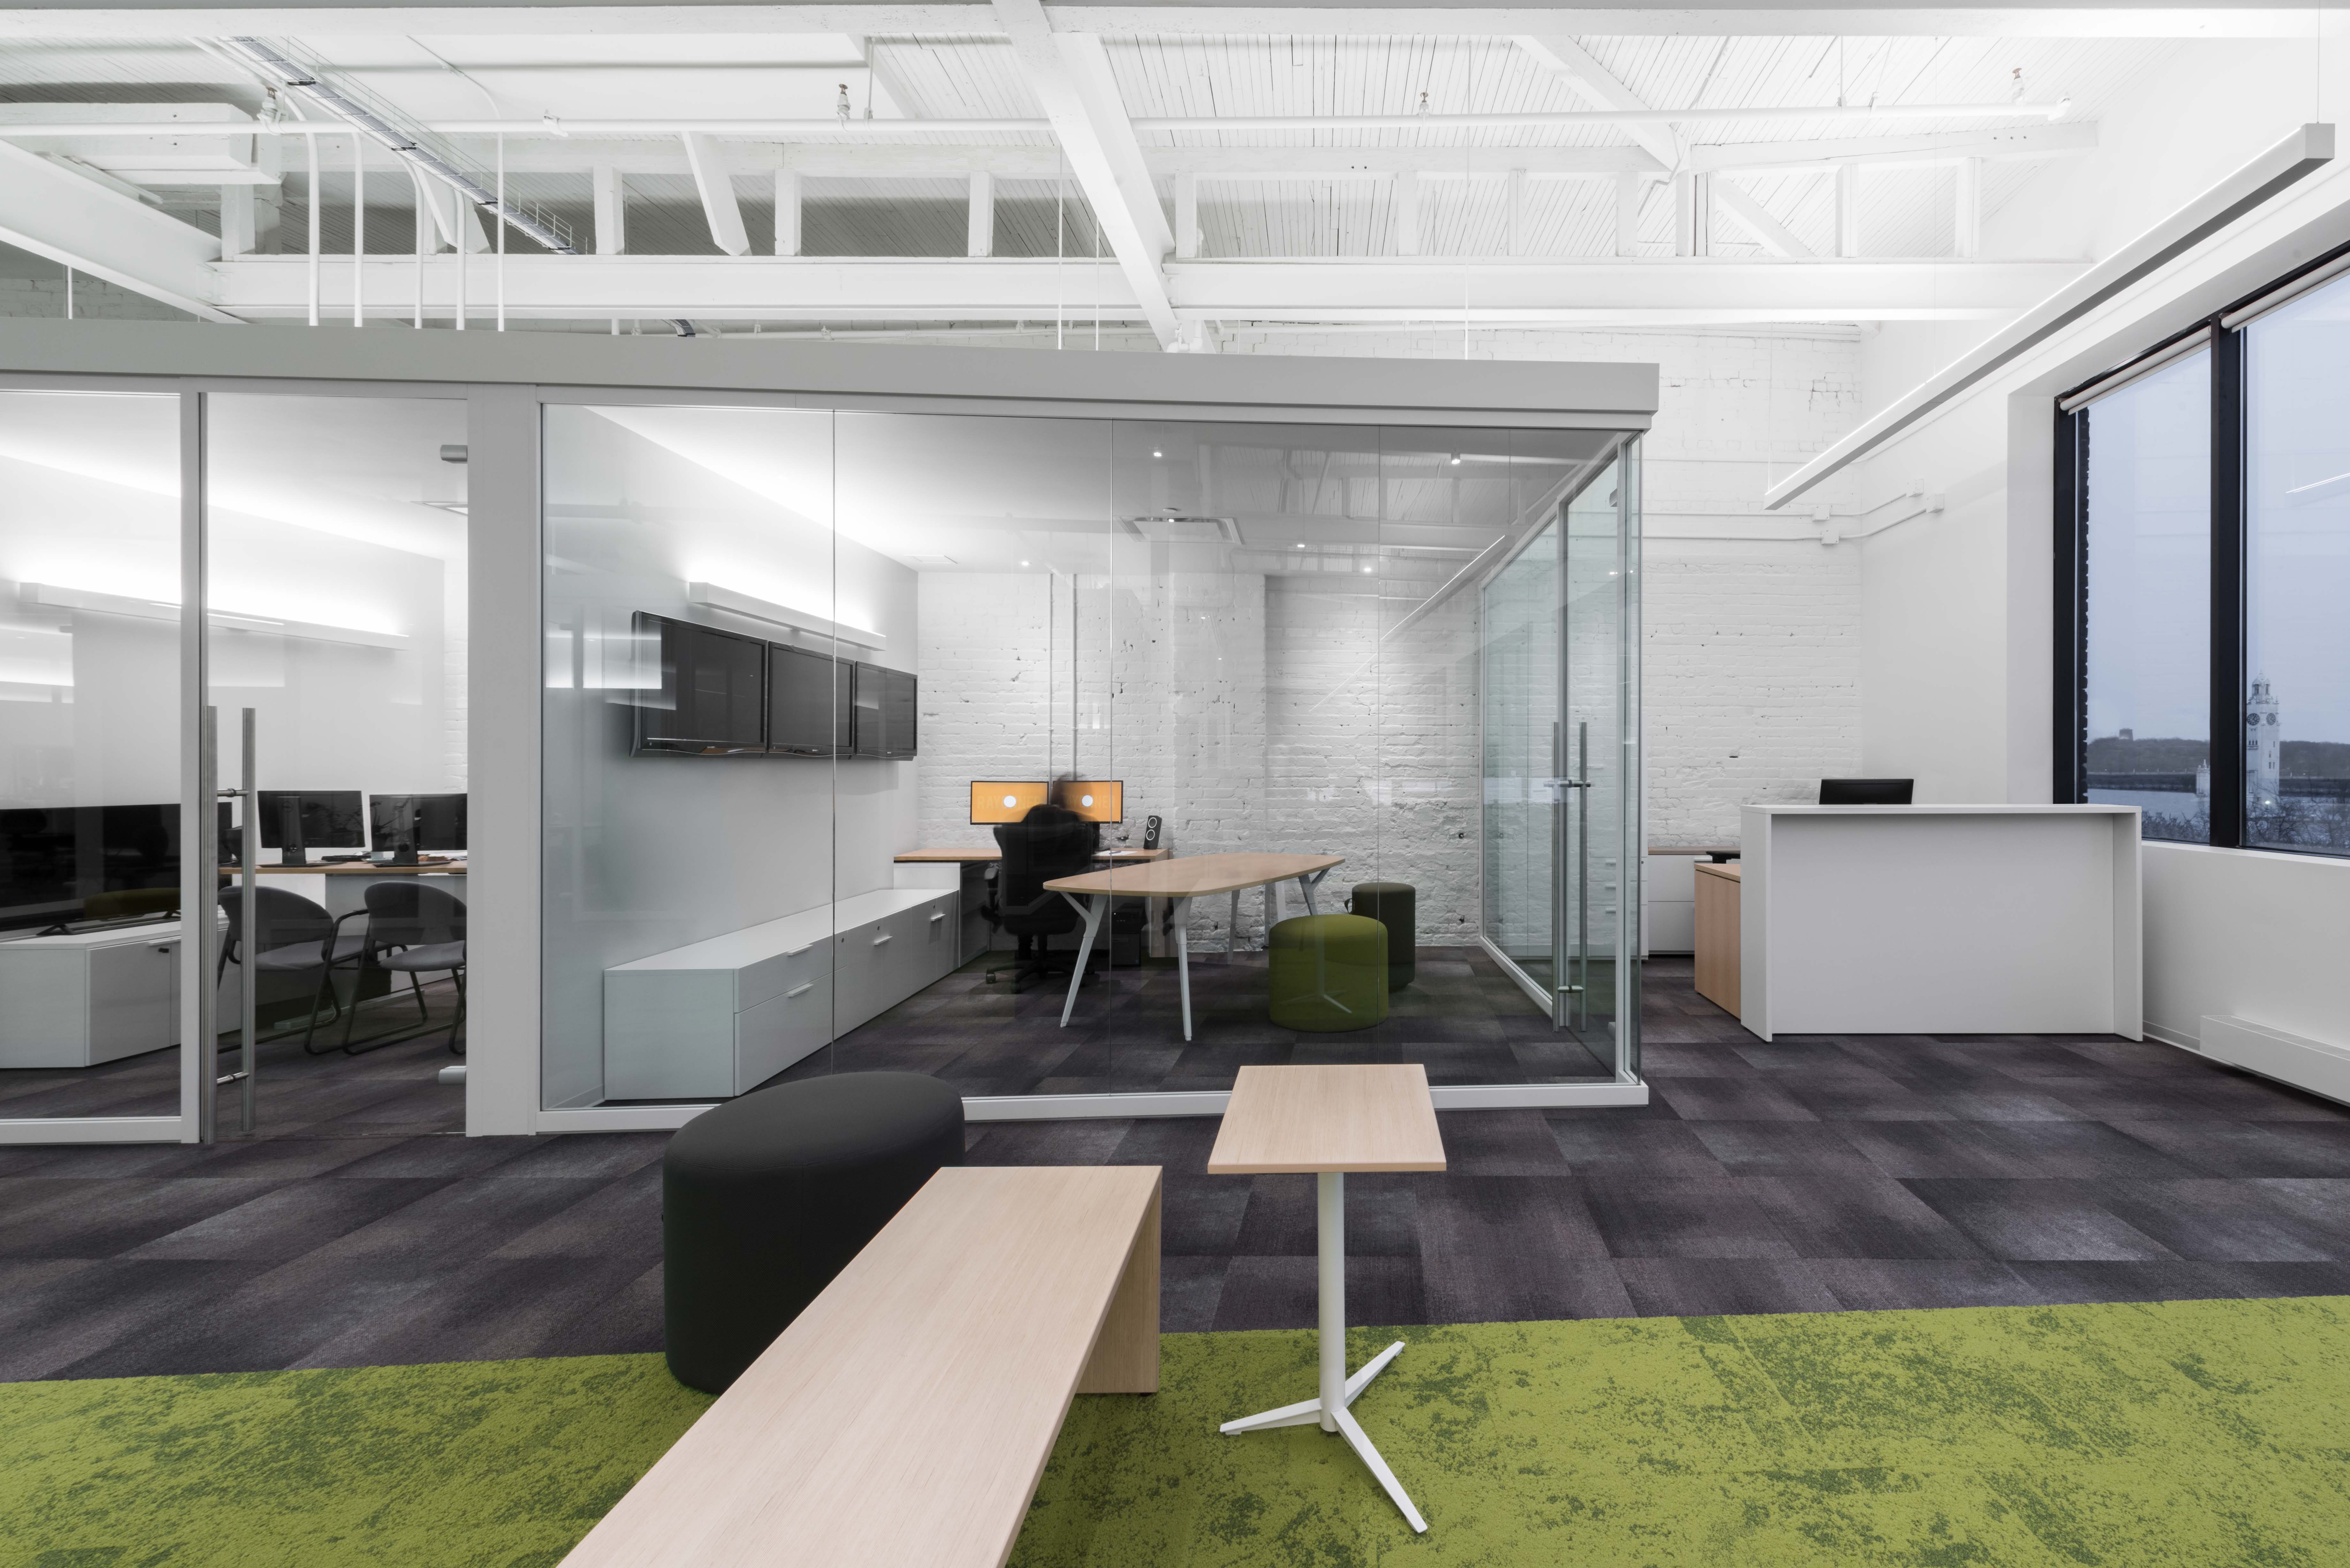 TV 5 office in Montreal showing clear glass demountable walls